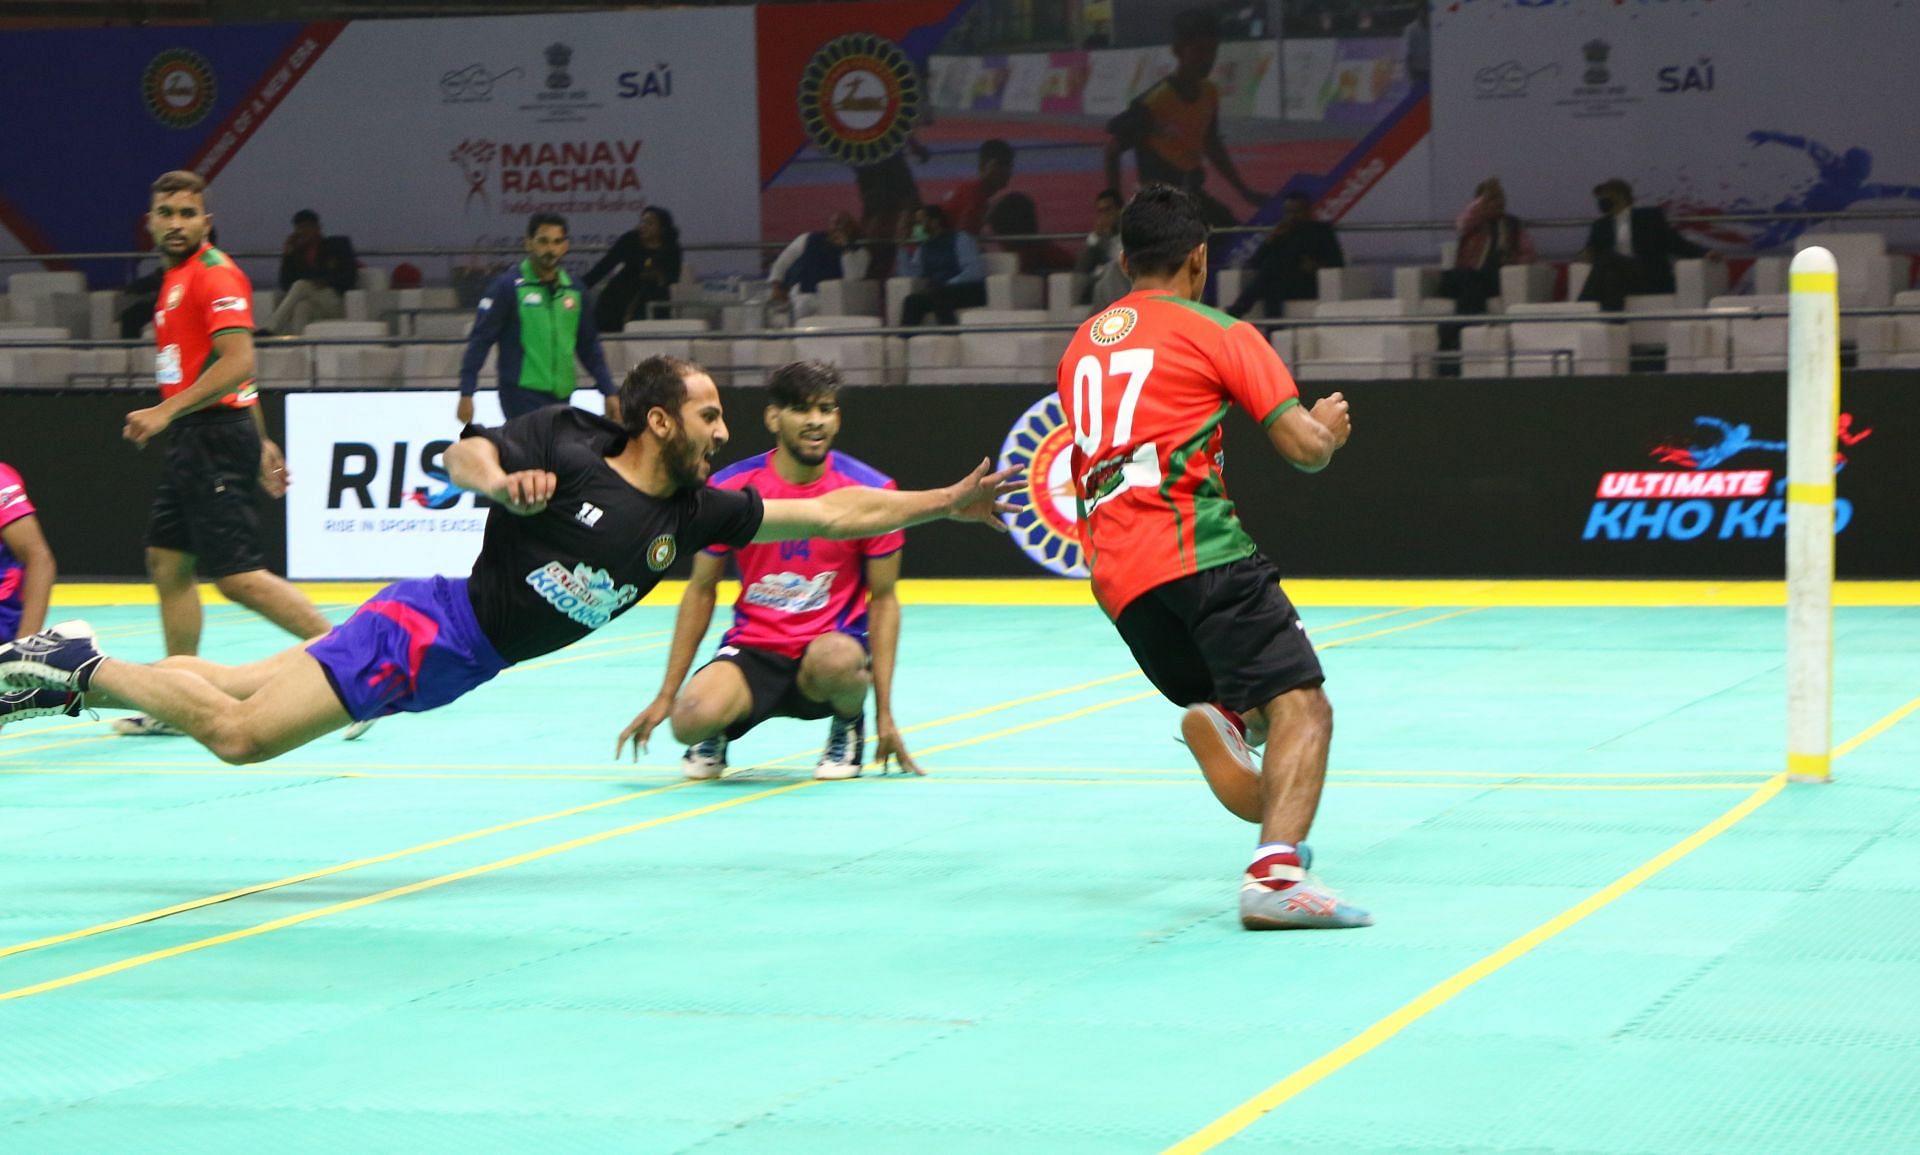 Ultimate Kho Kho professional league will be launched soon in India. (Pic credit: UKK)